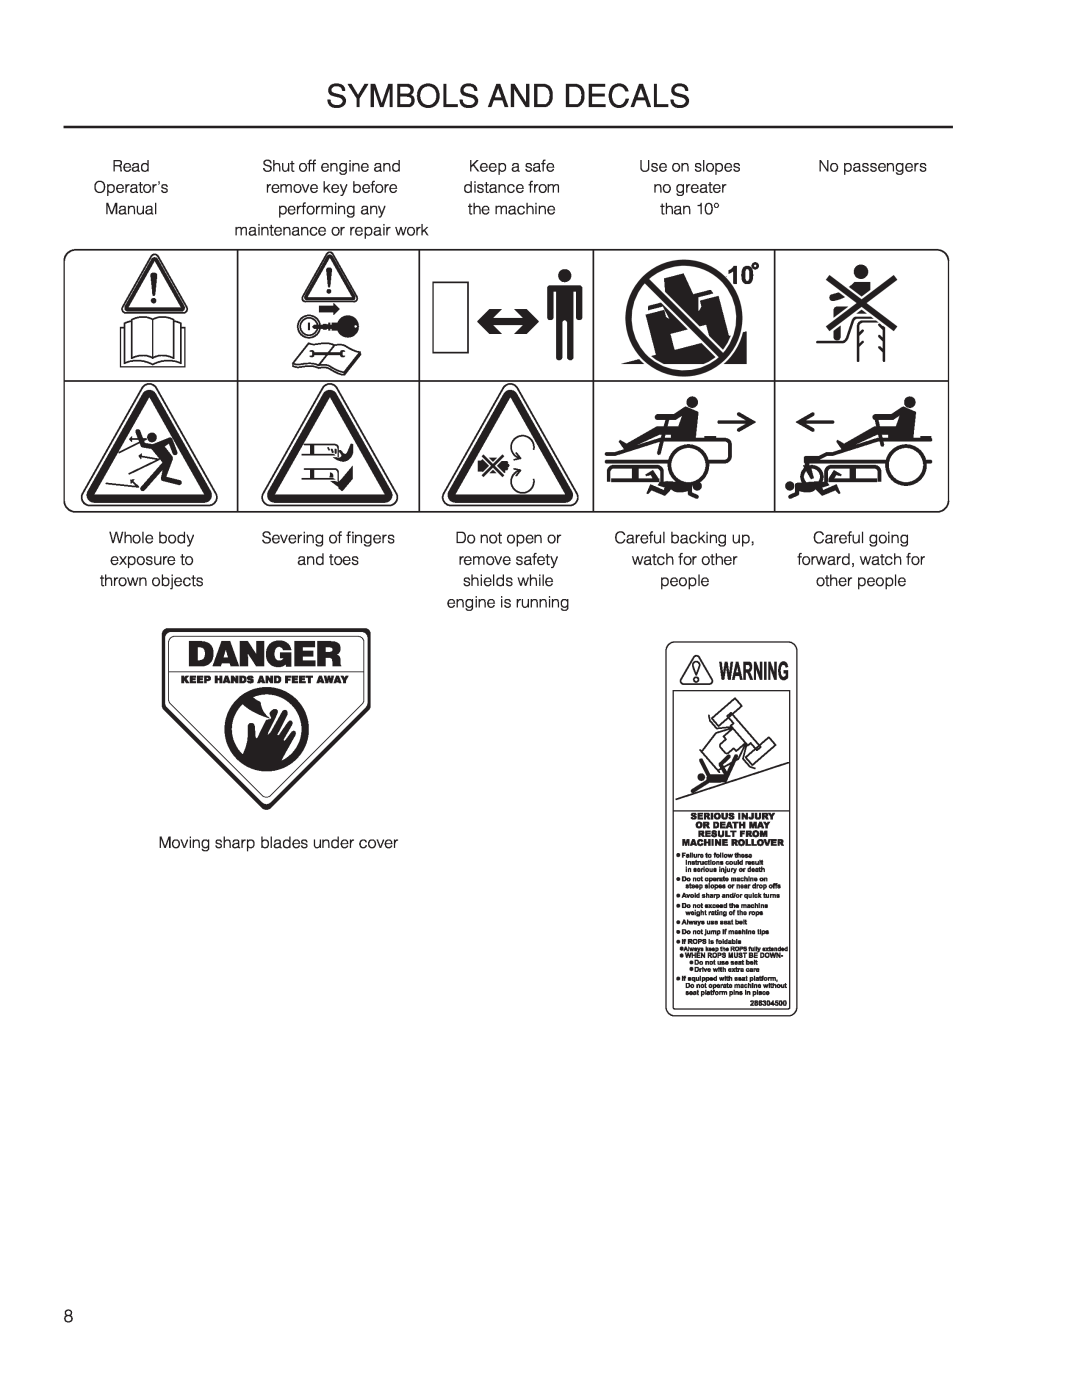 Yazoo/Kees ZPKW5426 manual symbols and decals, Manual, performing any, Whole body, Careful backing up, remove safety 